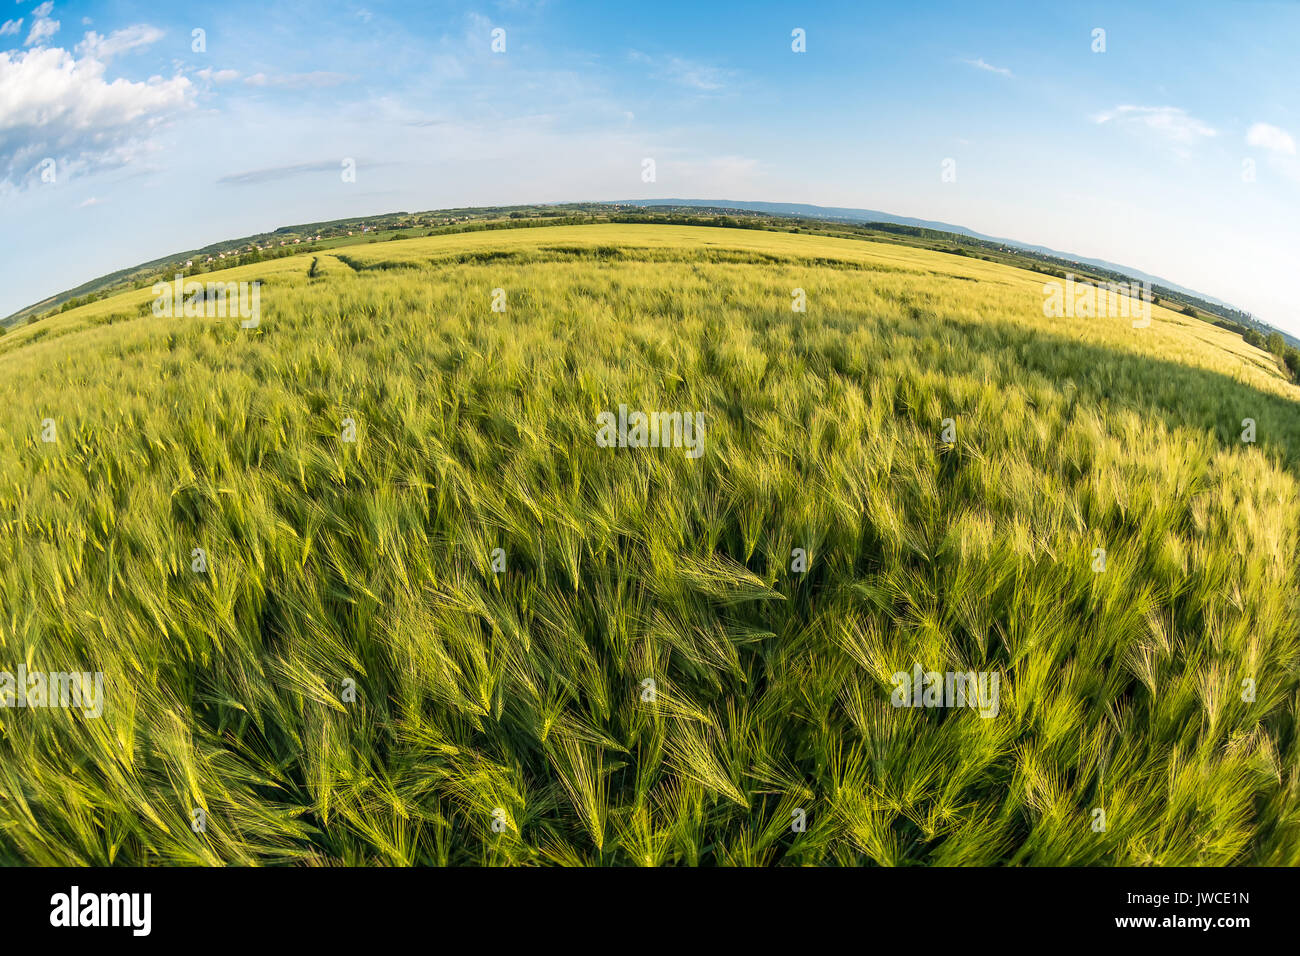 Young green ears of wheat, beautiful landscape with village on background, fish eye effect, Ukraine Stock Photo